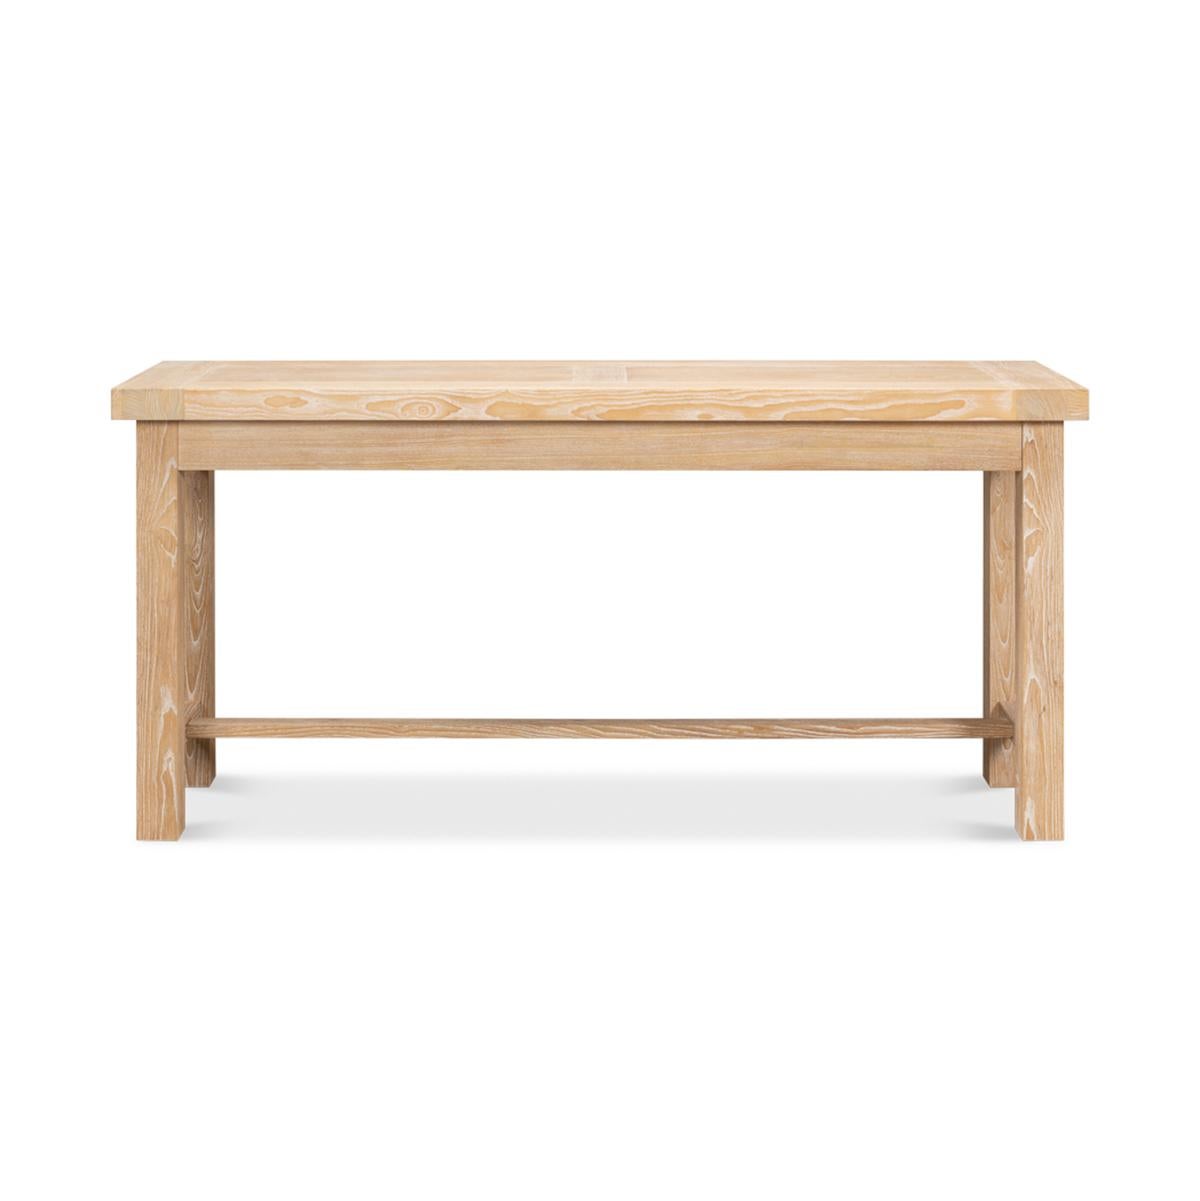 A modern Bauhaus oak console, with a natural oak finish, the bold classic modern design has a thick top and bold legs with an H stretcher.

Dimensions: 72